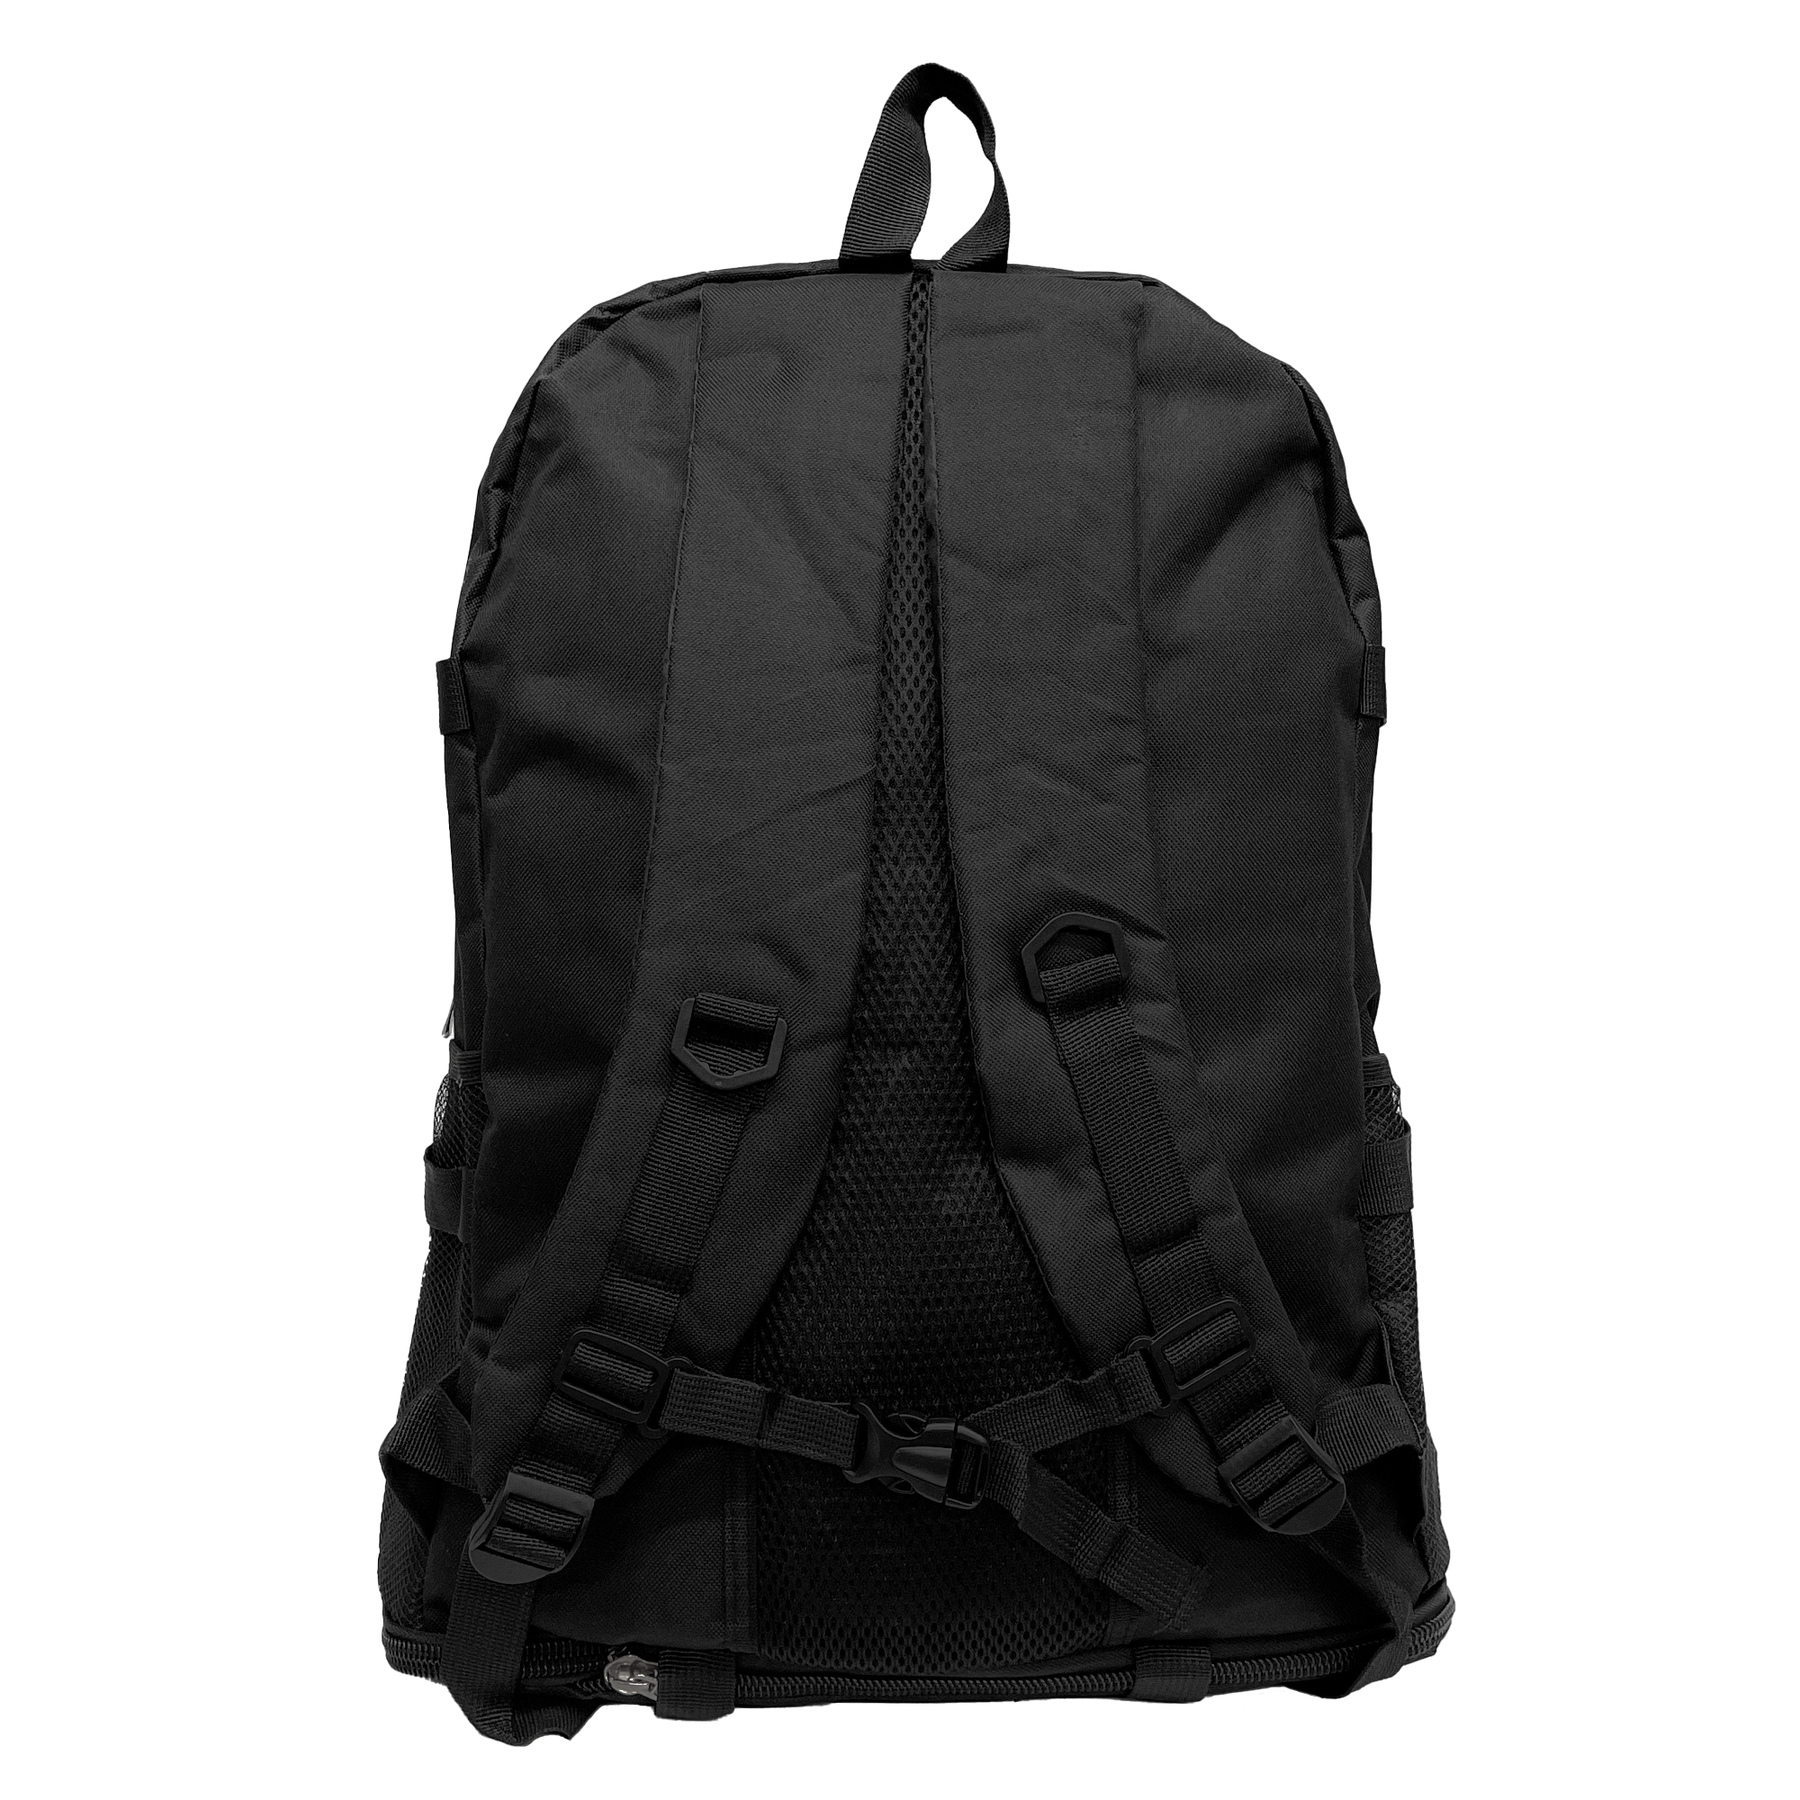 Or@mi Backpack Adventure 360: Versatility and Comfort for Every Excursion - 60 x 36 cm